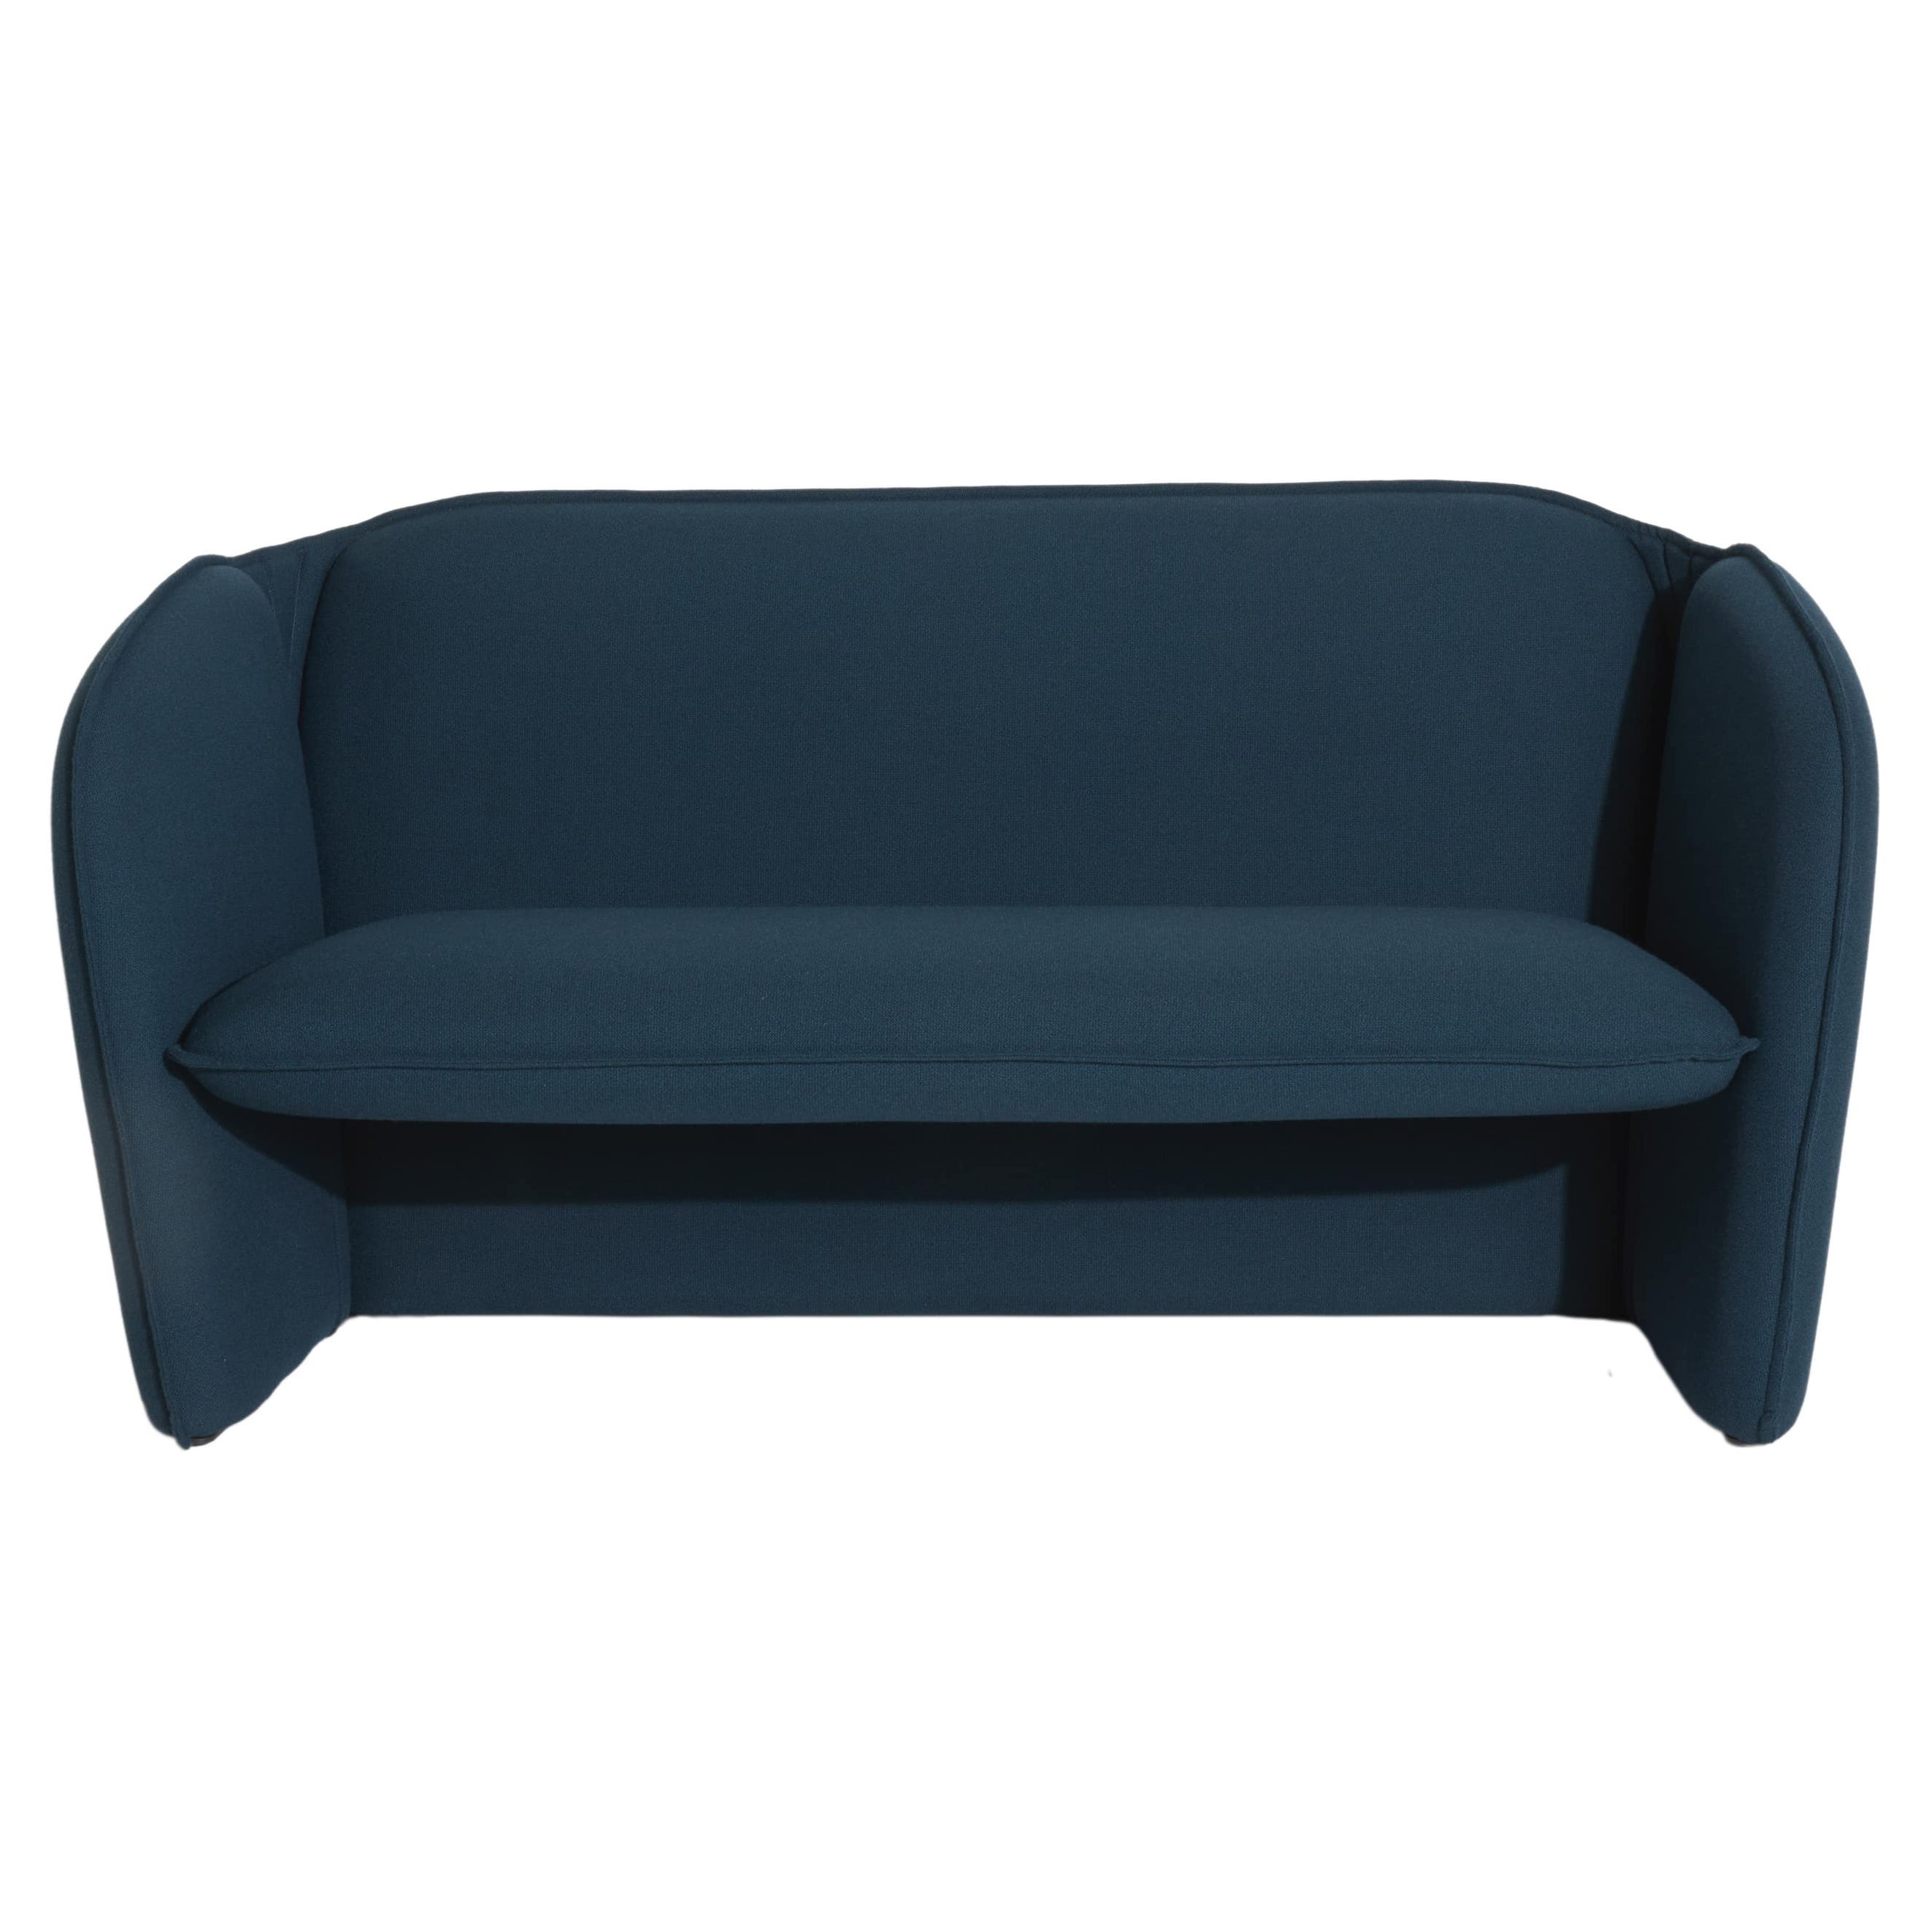 Petite Friture Lily Sofa in Navy Blue by Färg & Blanche, 2022 For Sale